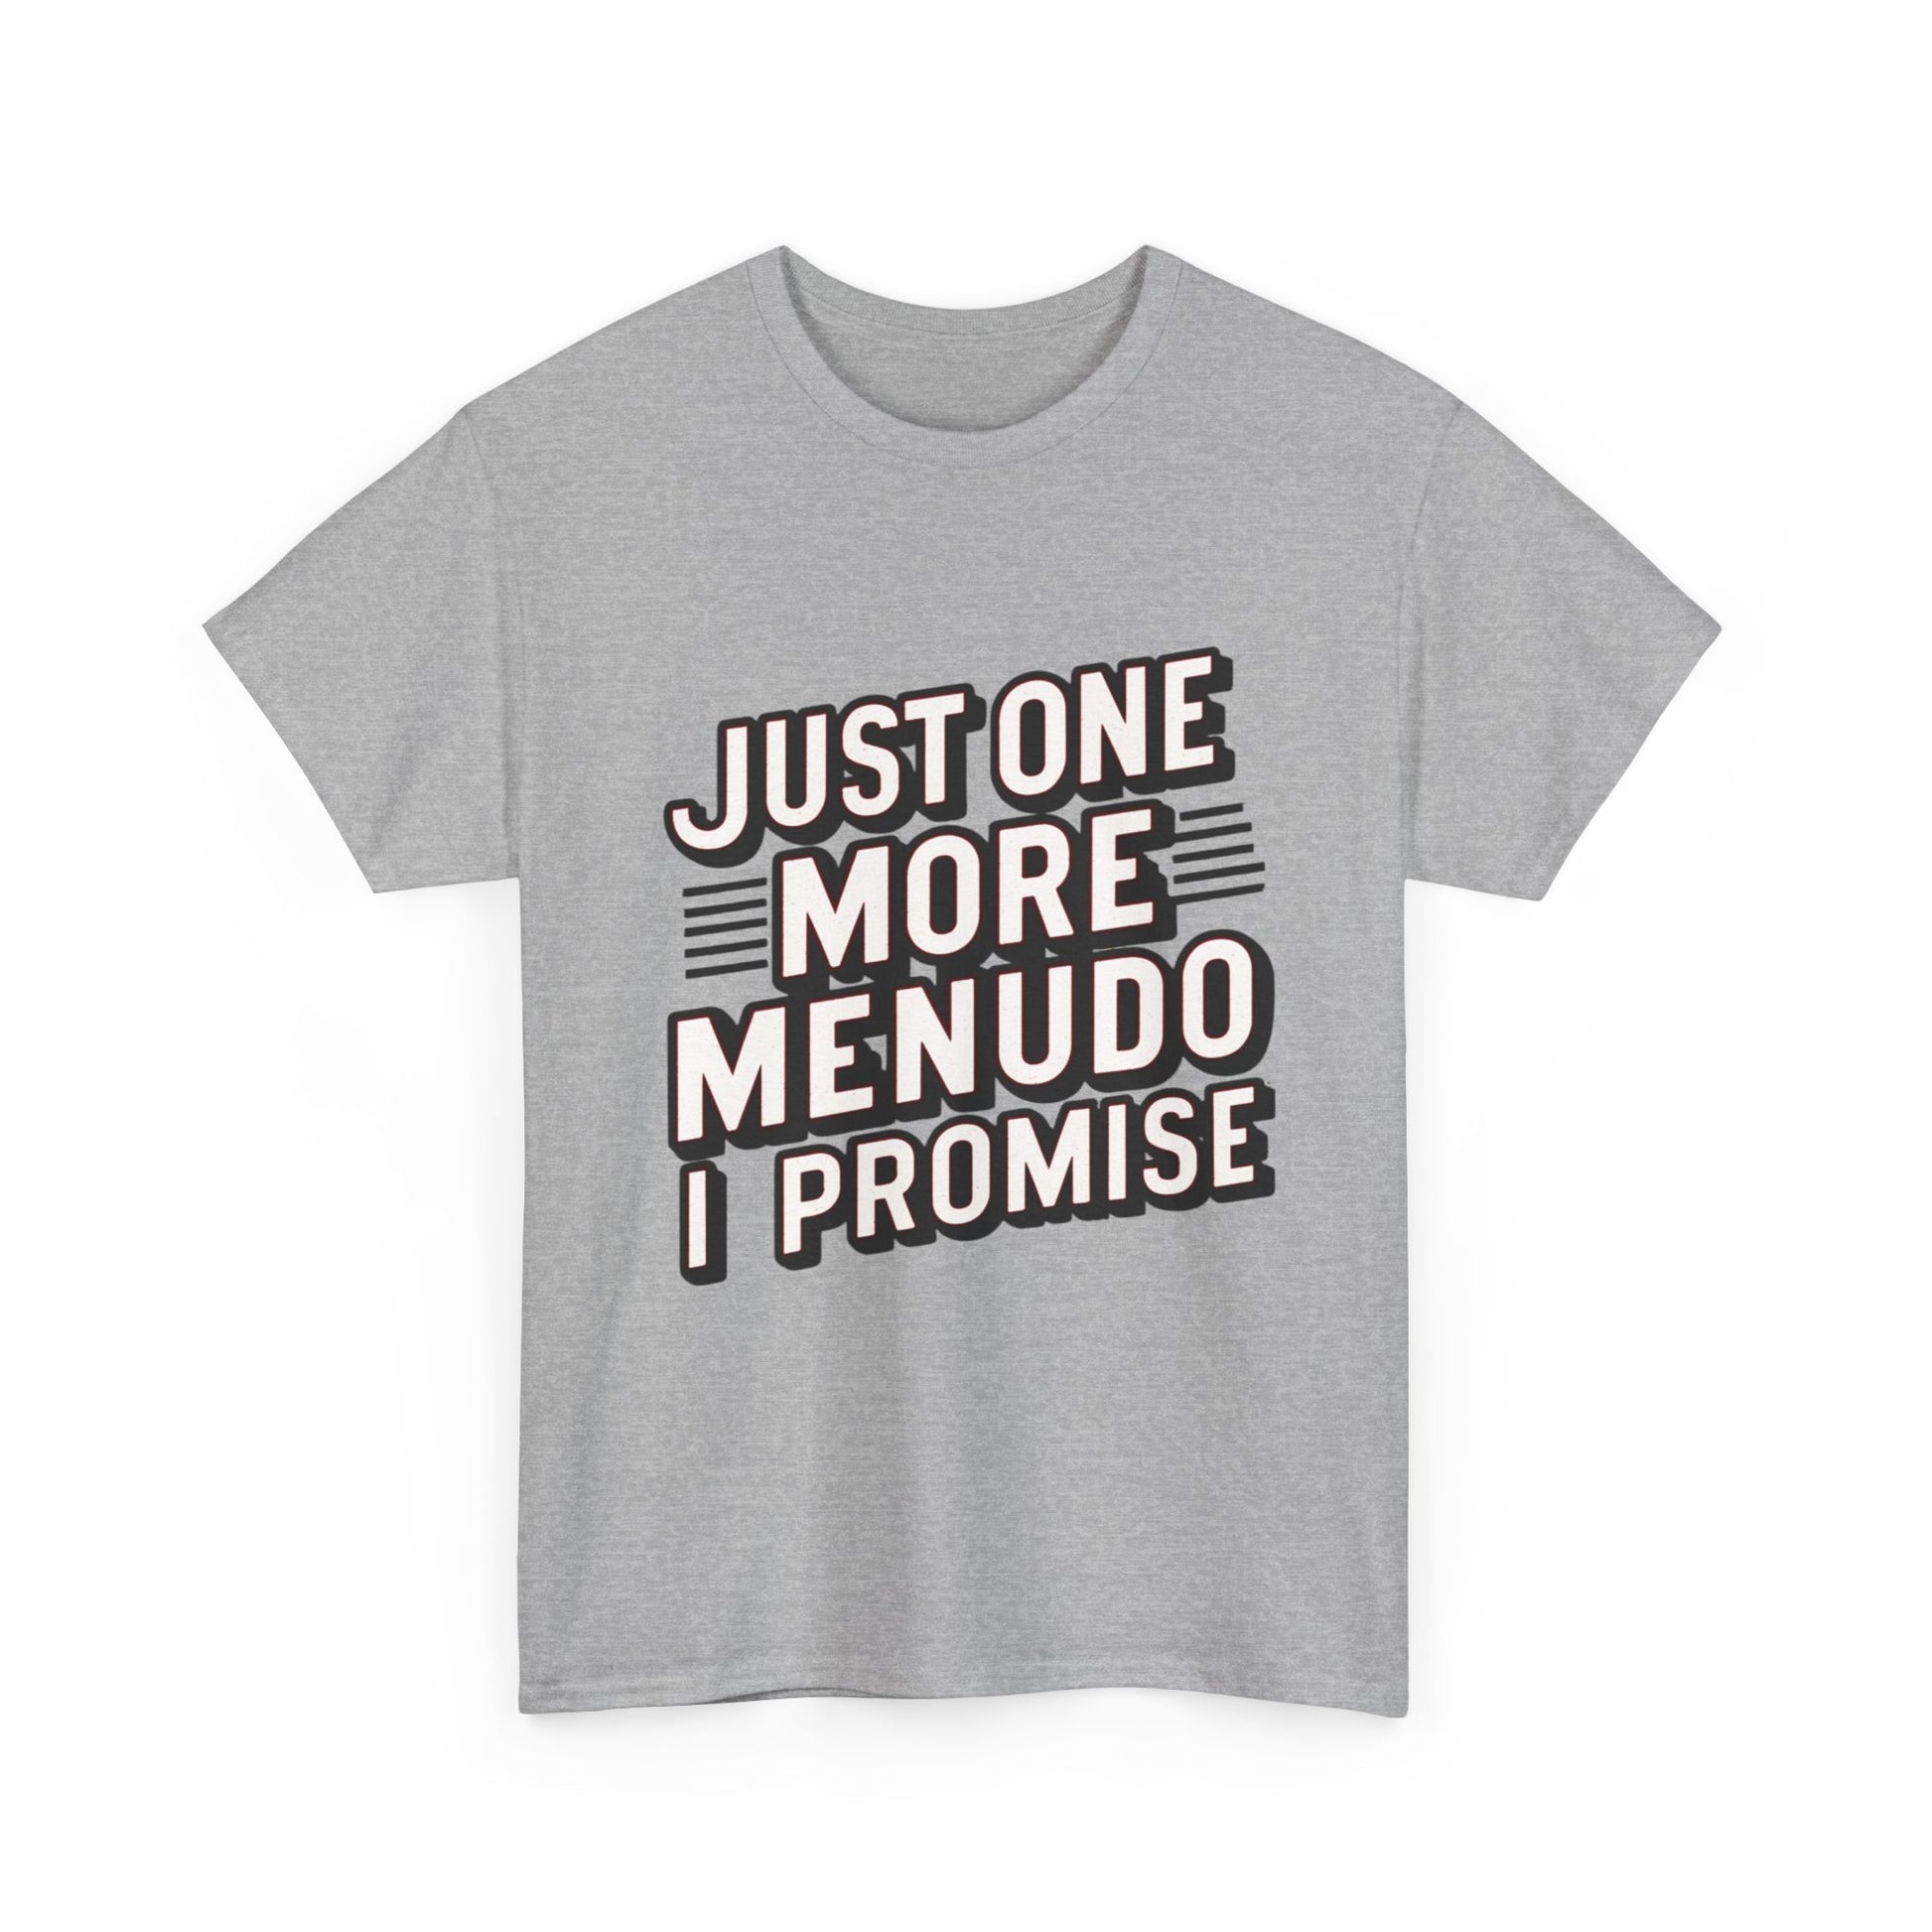 Just One More Menudo I Promise Mexican Food Graphic Unisex Heavy Cotton Tee Cotton Funny Humorous Graphic Soft Premium Unisex Men Women Sport Grey T-shirt Birthday Gift-39